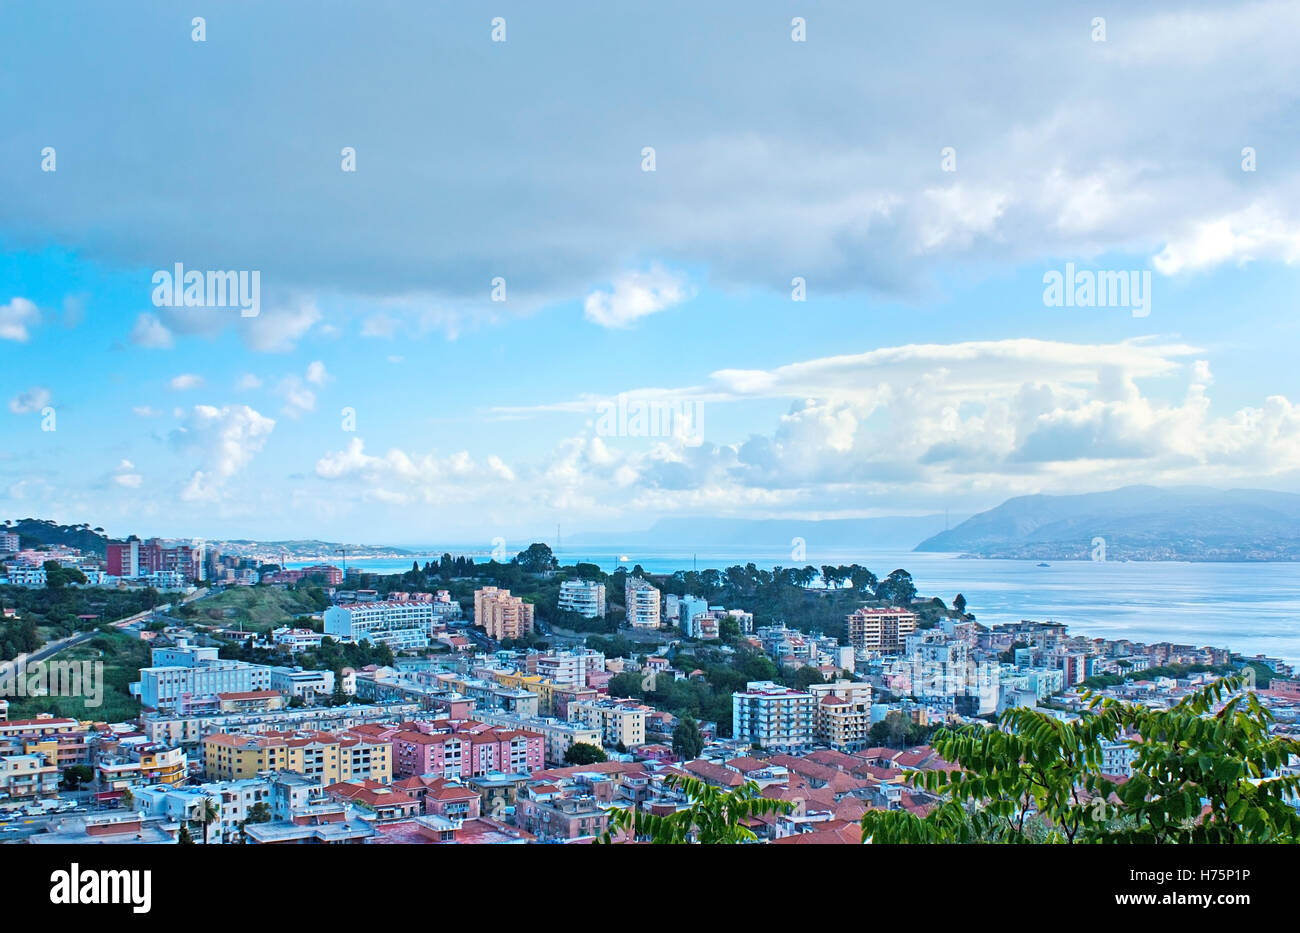 MESSINA, ITALY - OCTOBER 2, 2012: The modern districts of the city with the Messina Strait, separating Sicily from Italian mainl Stock Photo